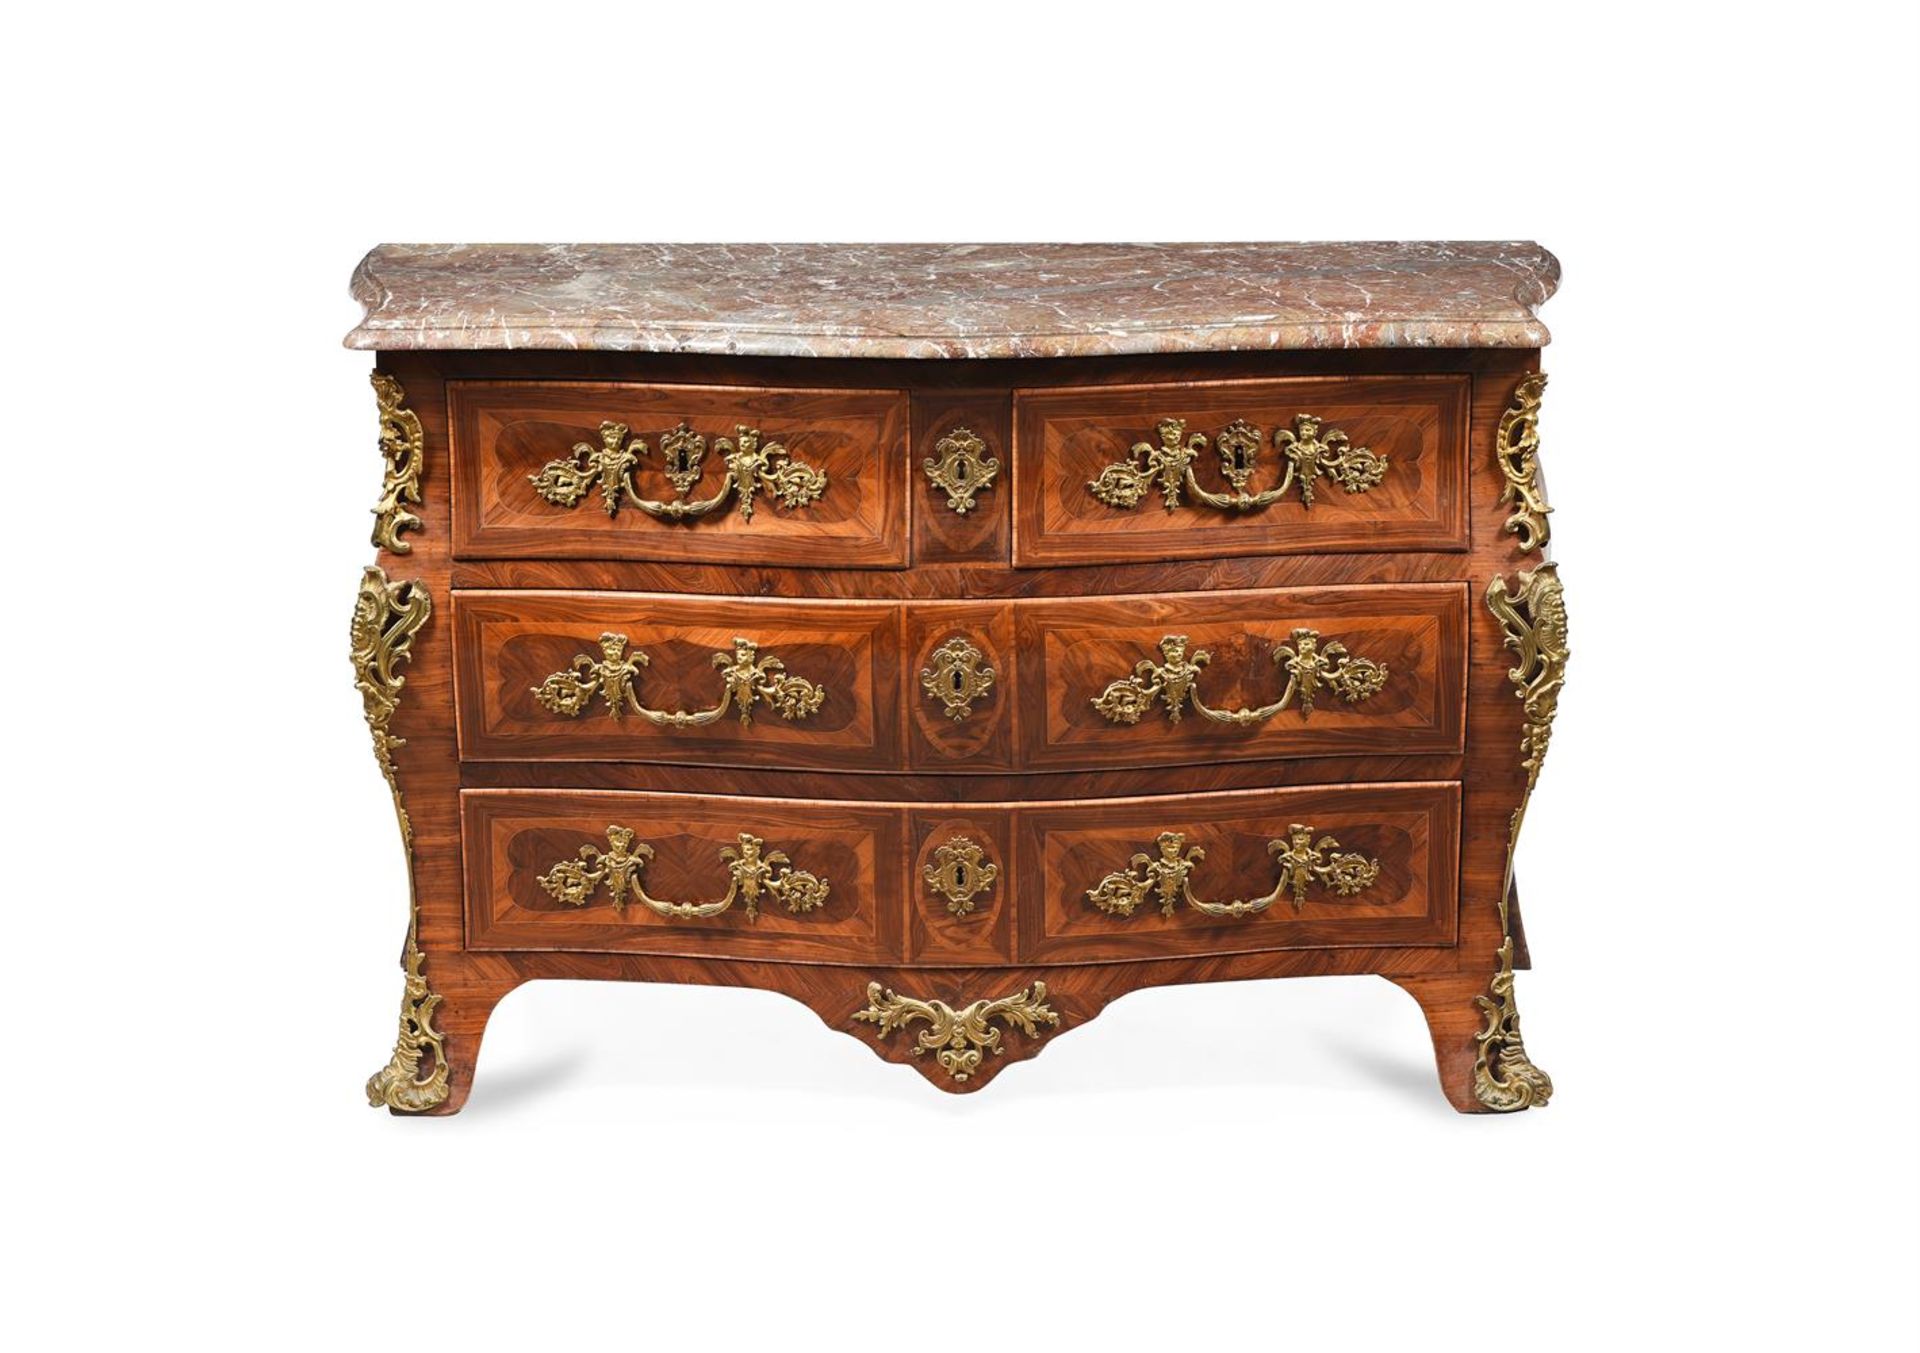 Y A LOUIS XV KINGWOOD, TULIPWOOD PARQUETRY AND GILT METAL MOUNTED COMMODE, FIRST HALF 18TH CENTURY